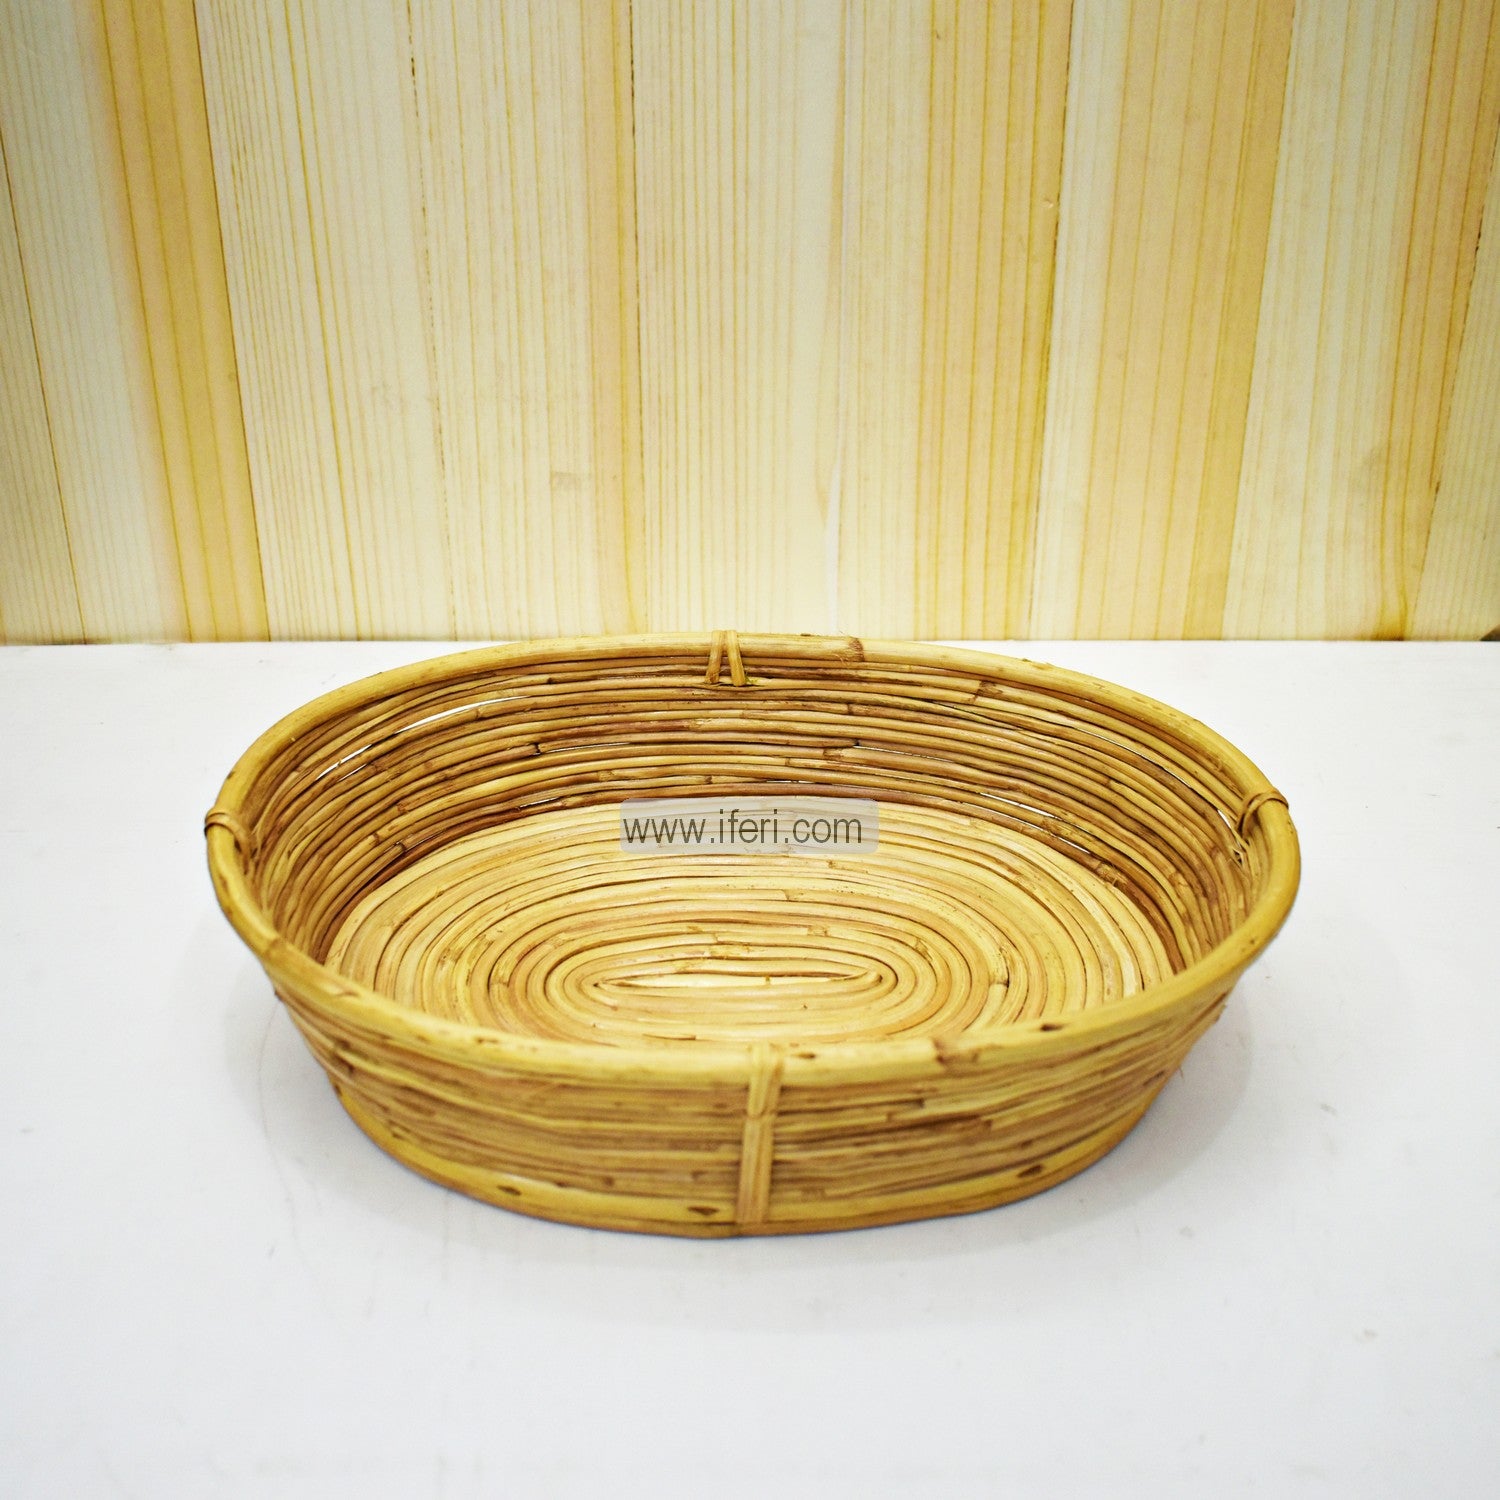 11.5 inch Oval Bread and Roti Basket for Kitchen and Dining Serving ALF0976